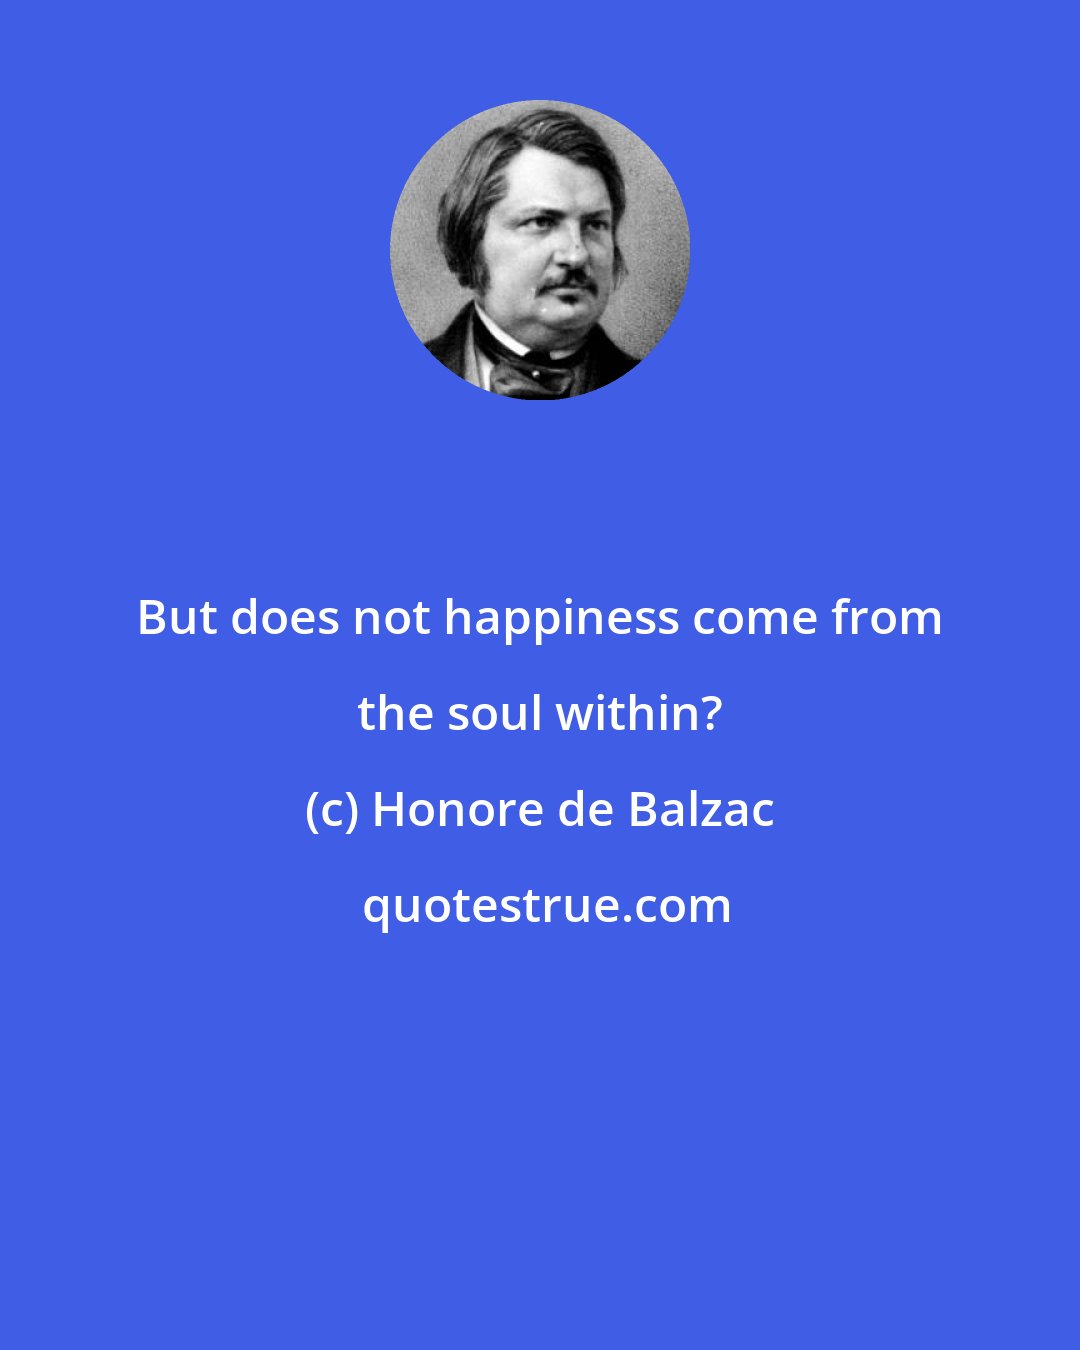 Honore de Balzac: But does not happiness come from the soul within?